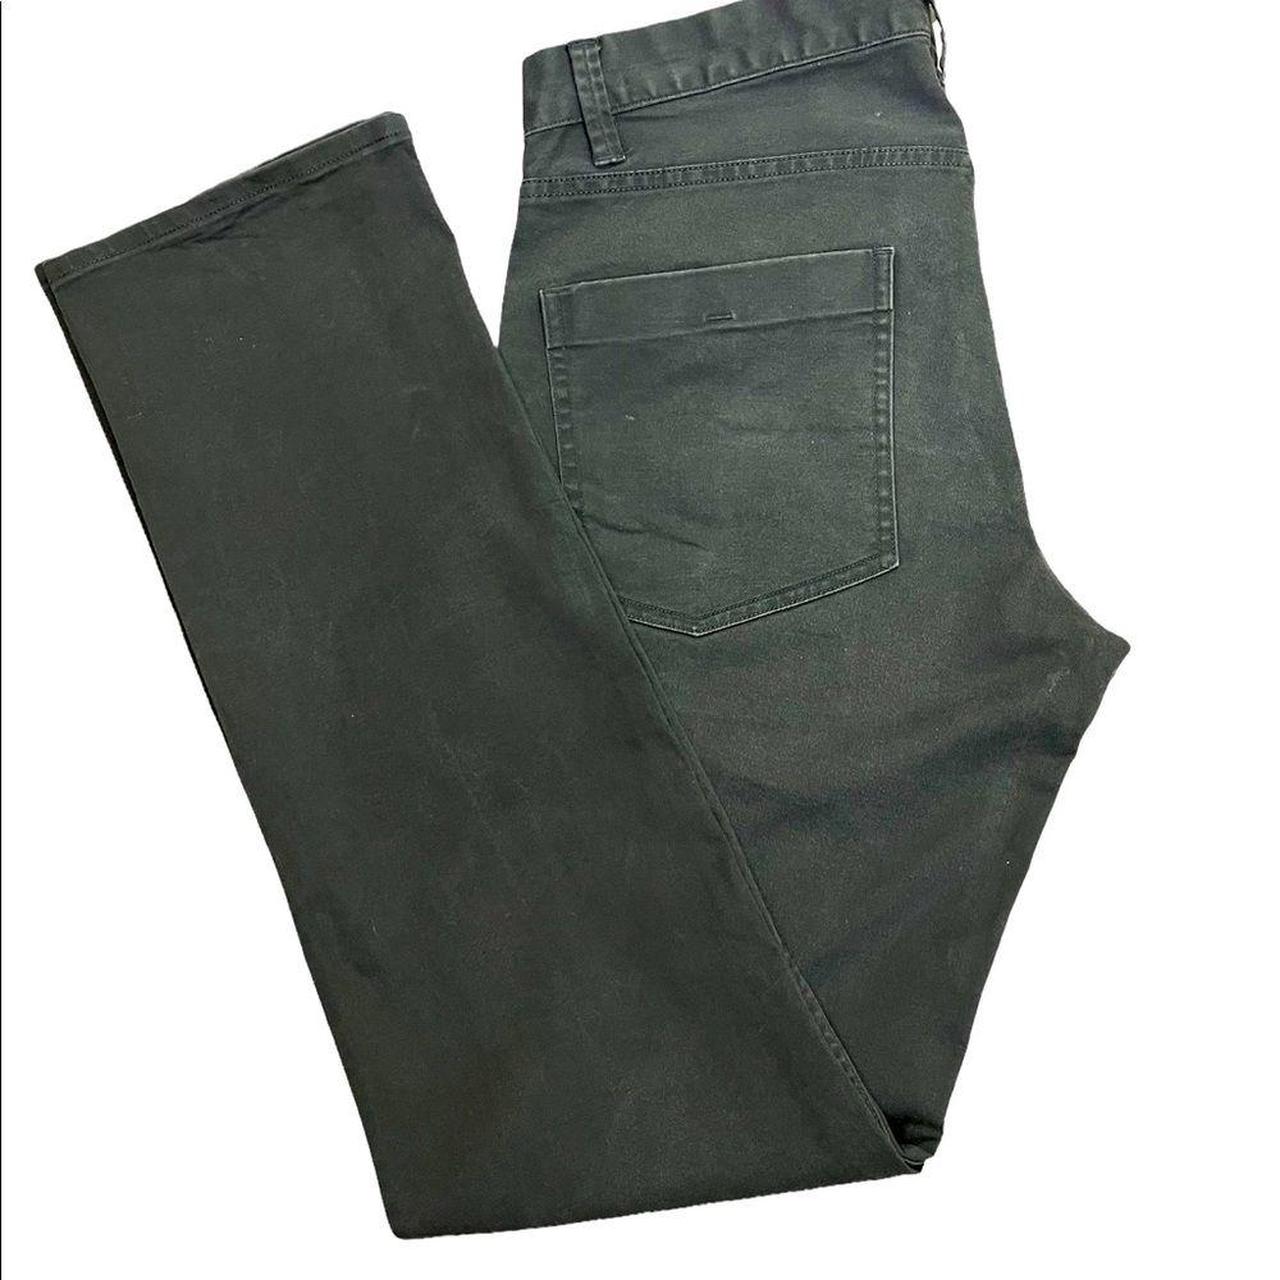 Product Image 1 - These Theory pants are a